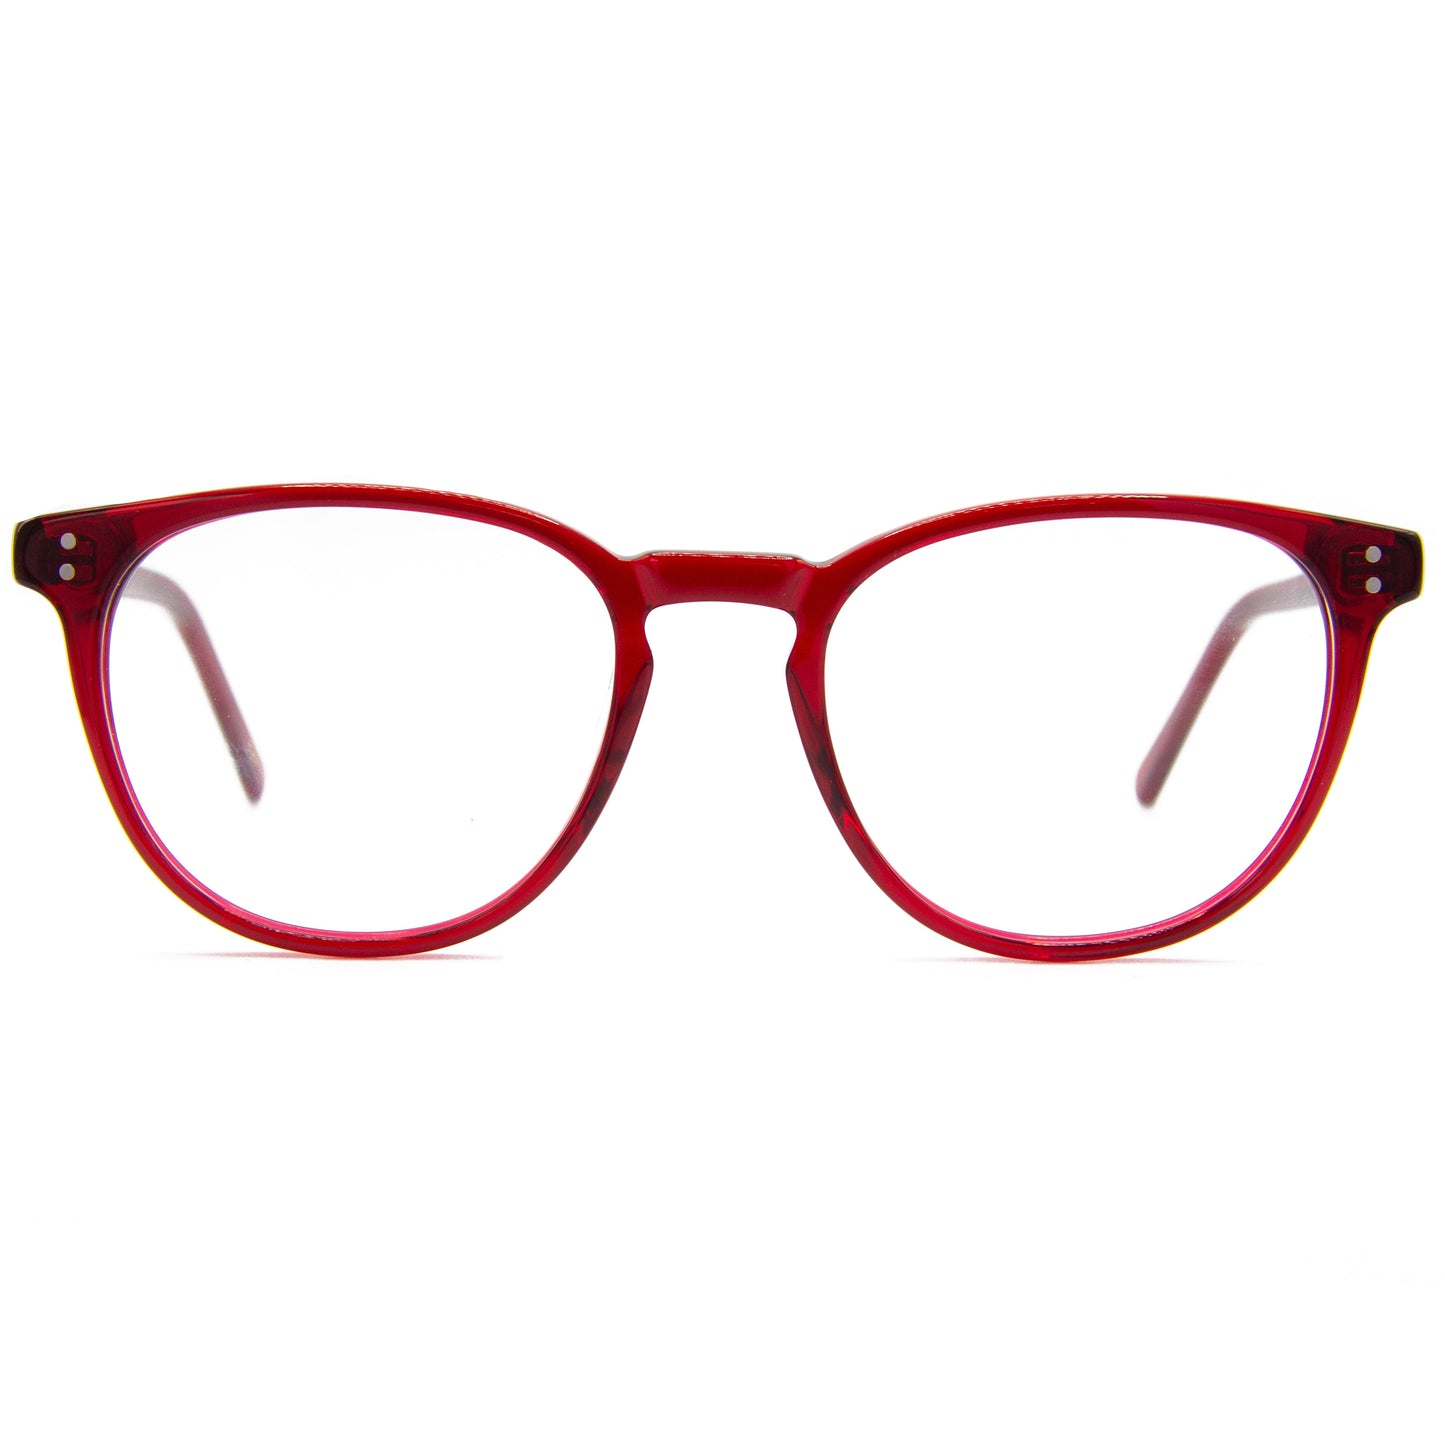  3 brothers - Ant - Red - Prescription Glasses